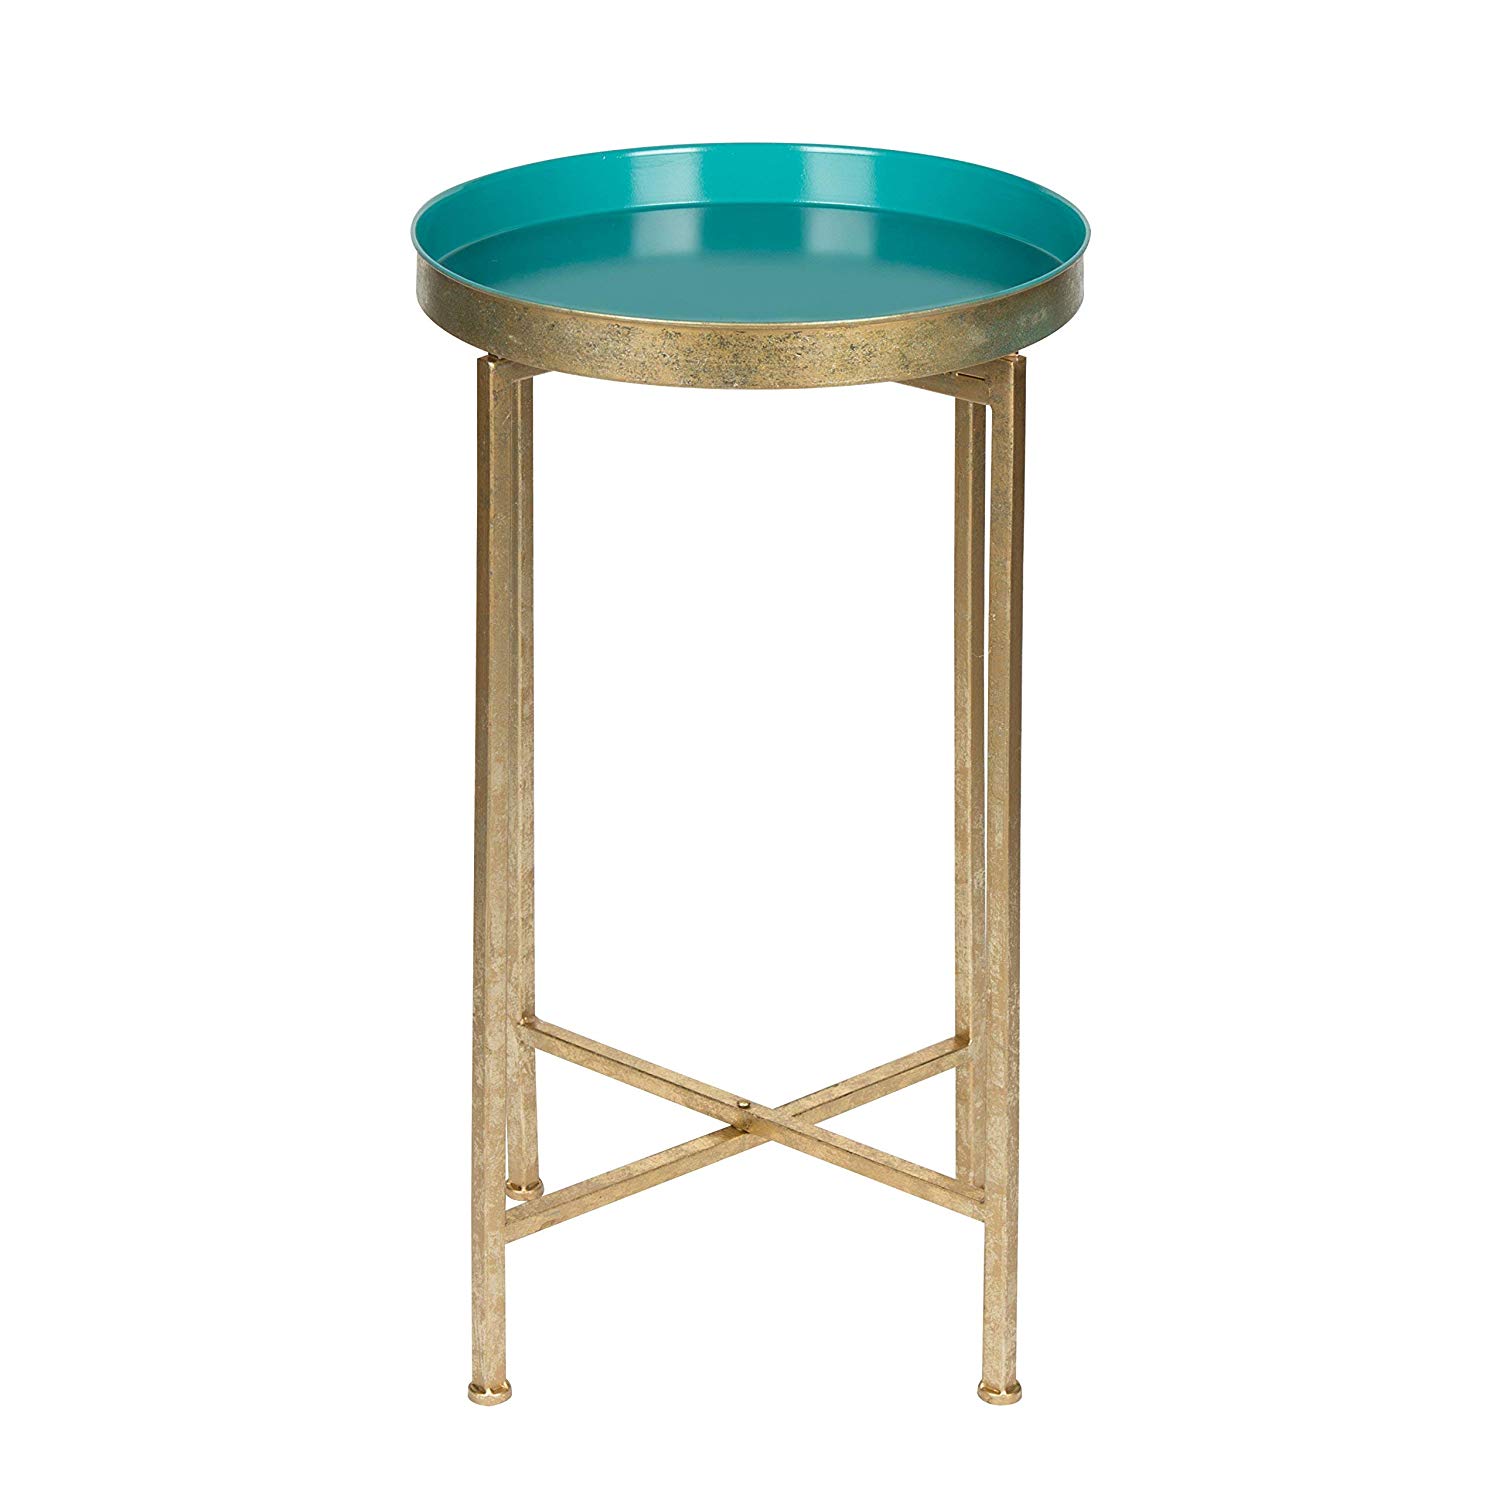 kate and laurel celia round metal foldable tray accent table with teal gold kitchen dining gallerie pillows mirror company living room lamp sets retro bedroom furniture half